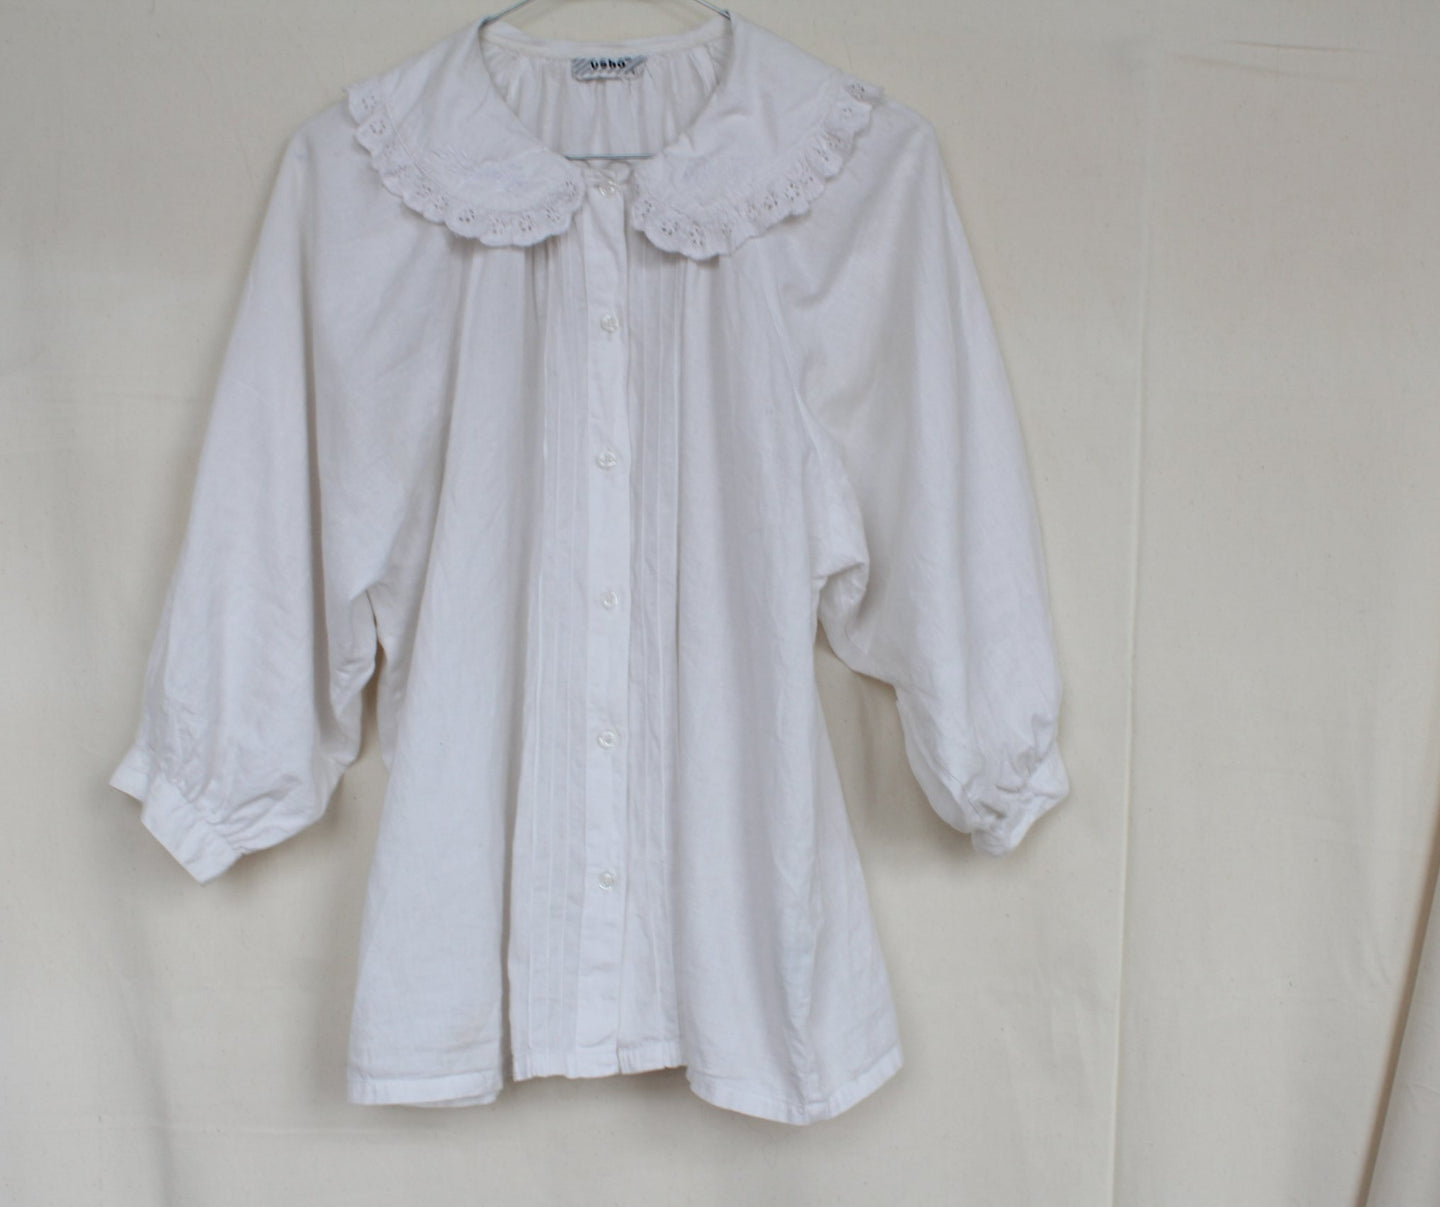 Vintage white cotton blouse with embroidered collar, size S/M